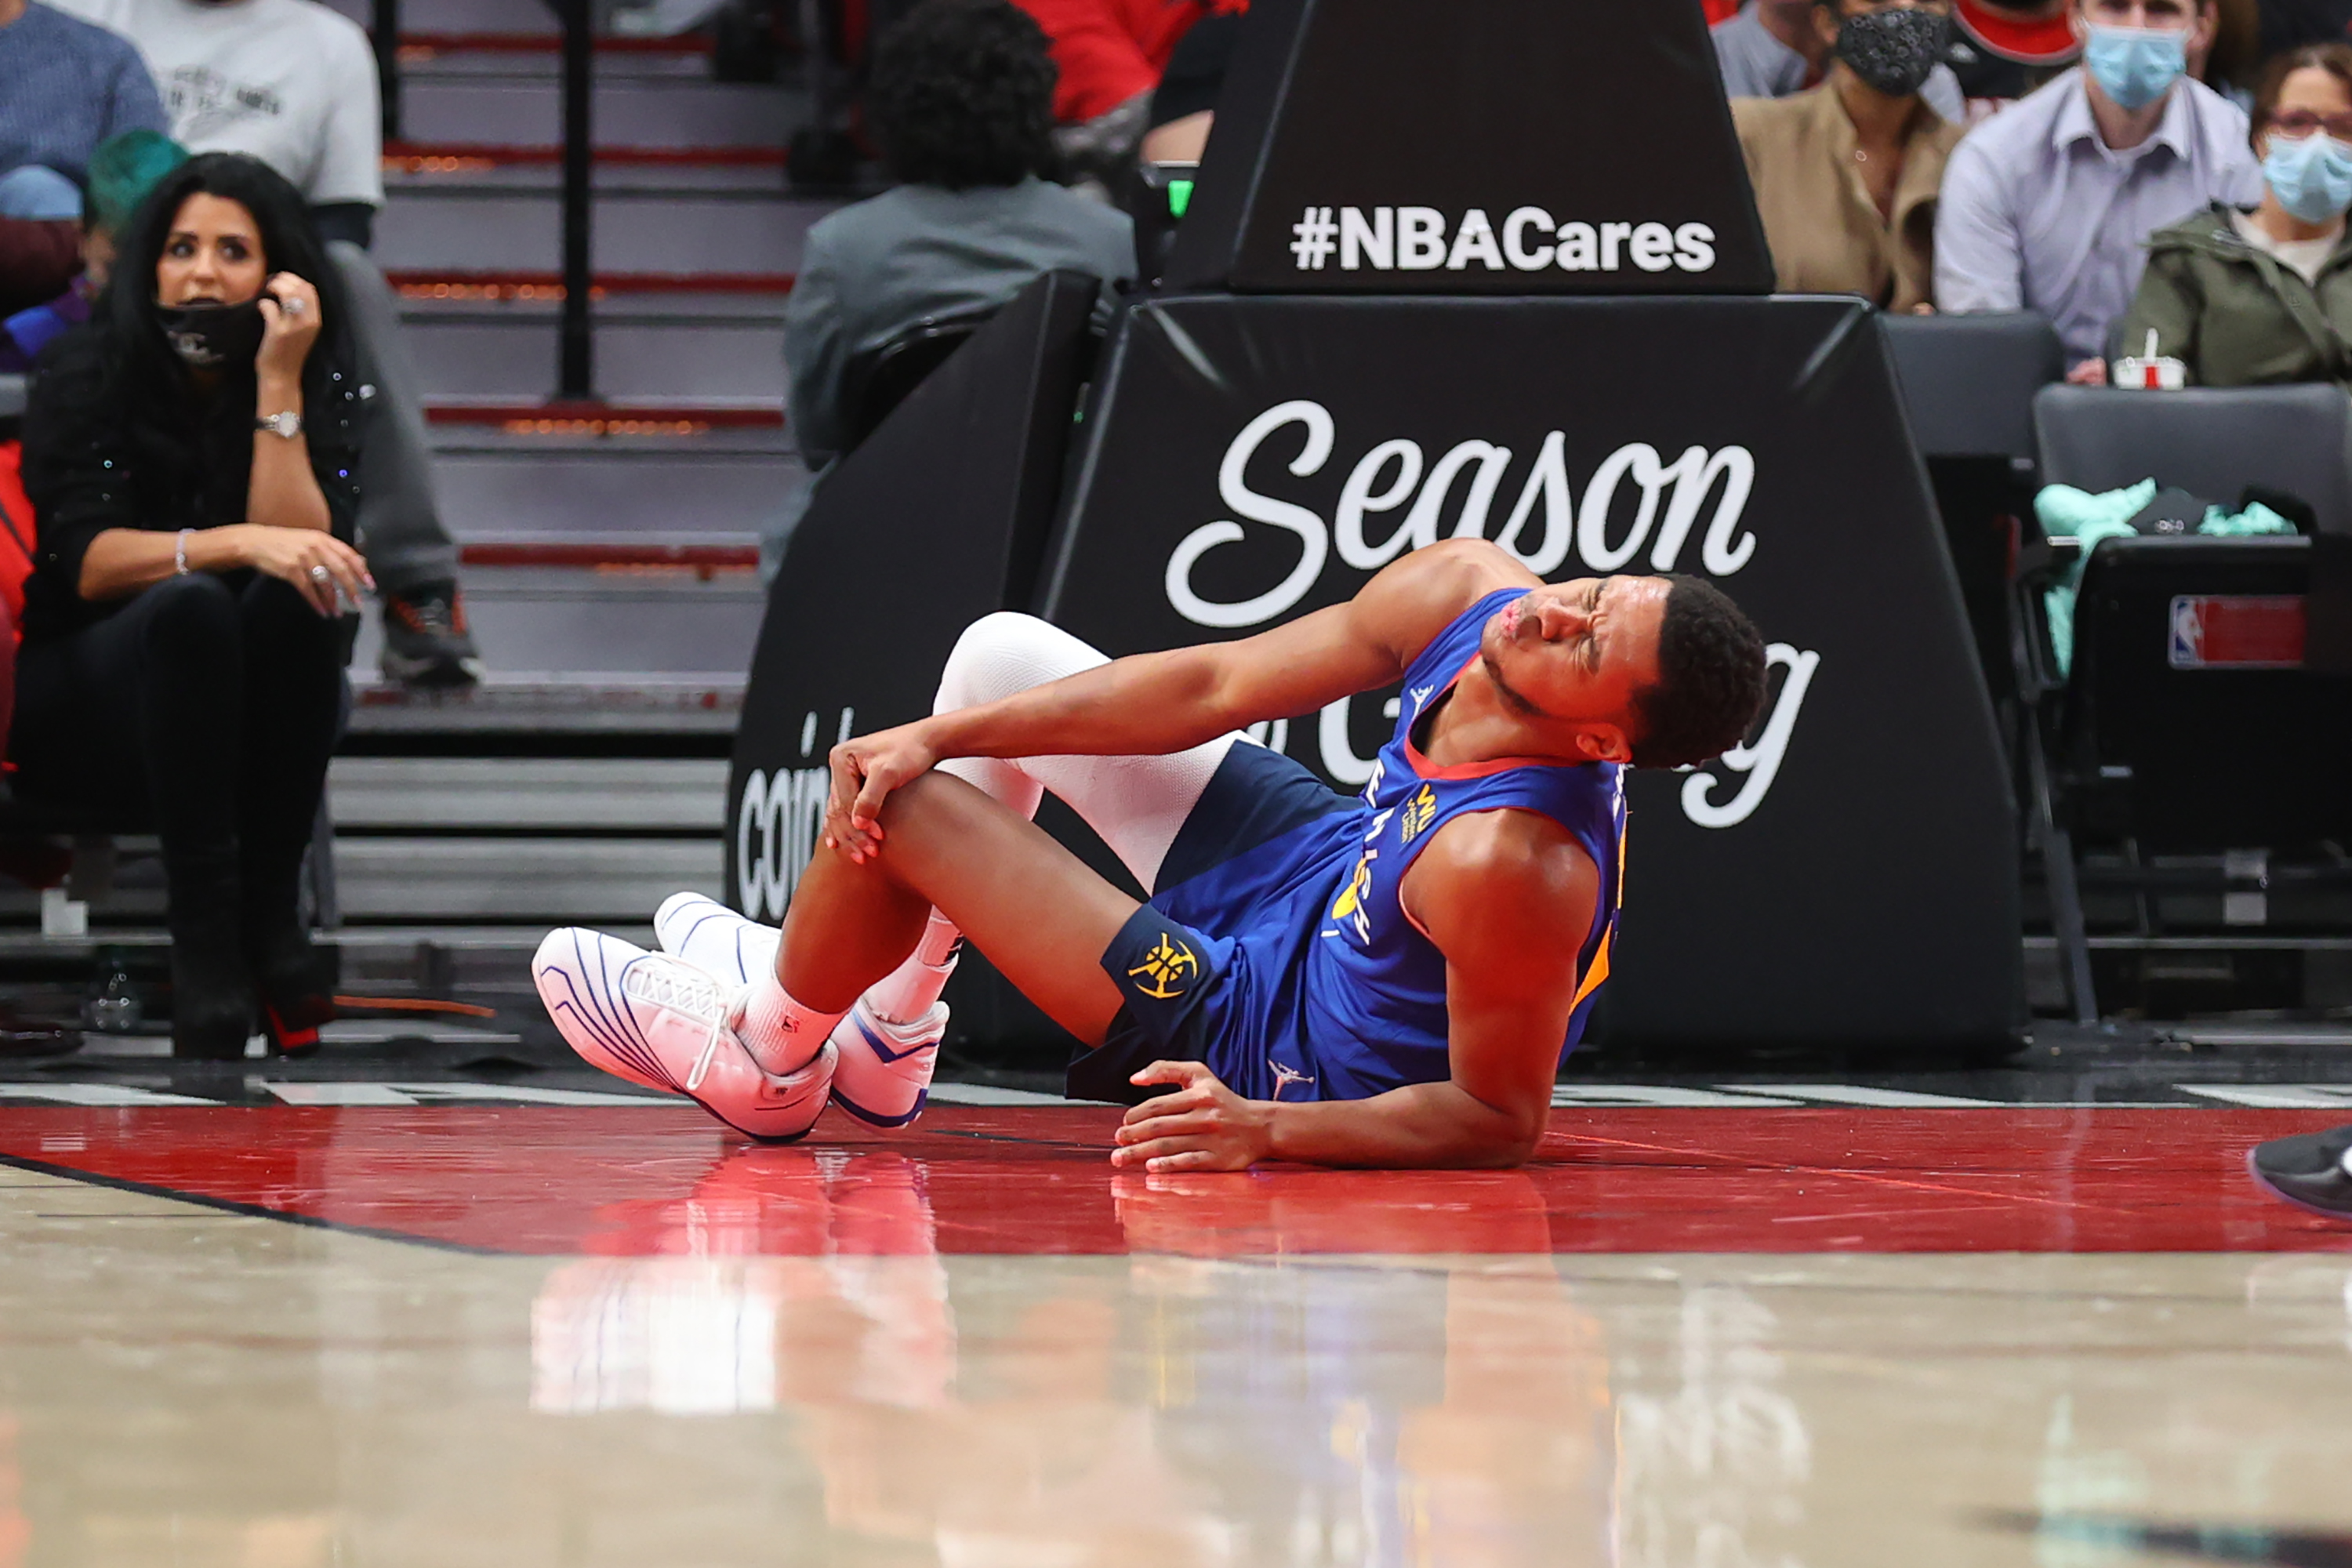 Denver Nuggets guard P.J. Dozier grabs his knee during a game against the Portland Trail Blazers